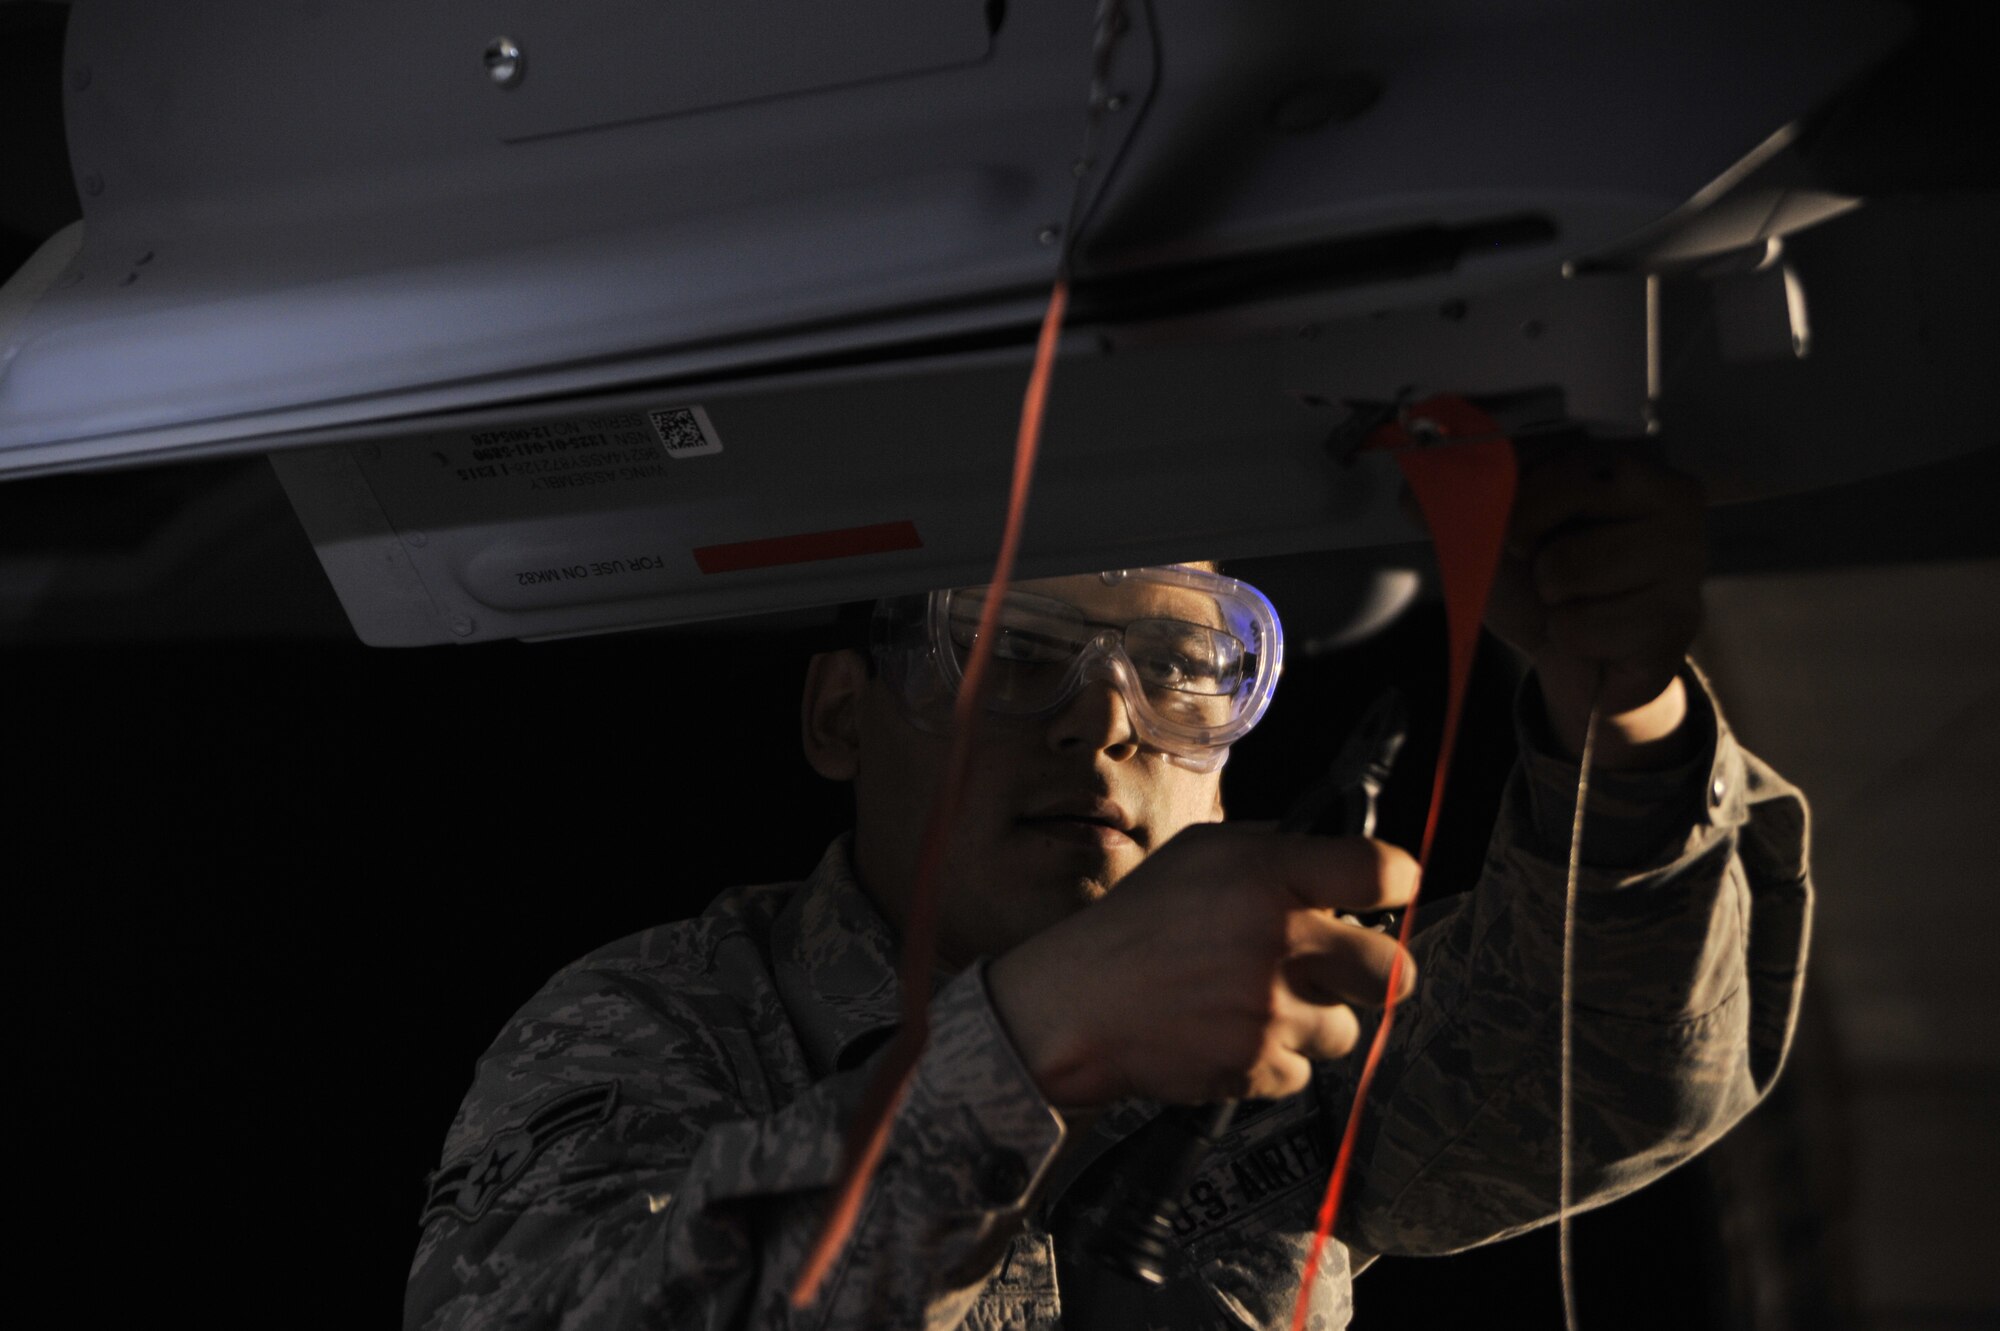 Airman 1st Class Luis safety wires a GBU-12 Paveway II laser-guided bomb onto an MQ-9 Reaper during exercise Combat Hammer May 15, 2014, at Creech Air Force Base, Nev. Fighter, bomber and remotely piloted aircraft units around the Air Force are evaluated four times a year and provided weapons, airspace and targets from Hill AFB, Utah, or Eglin AFB, Fla. Luis is a load crew member with the 432nd Aircraft Maintenance Squadron. (U.S. Air Force photo/Airman 1st Class C.C.)